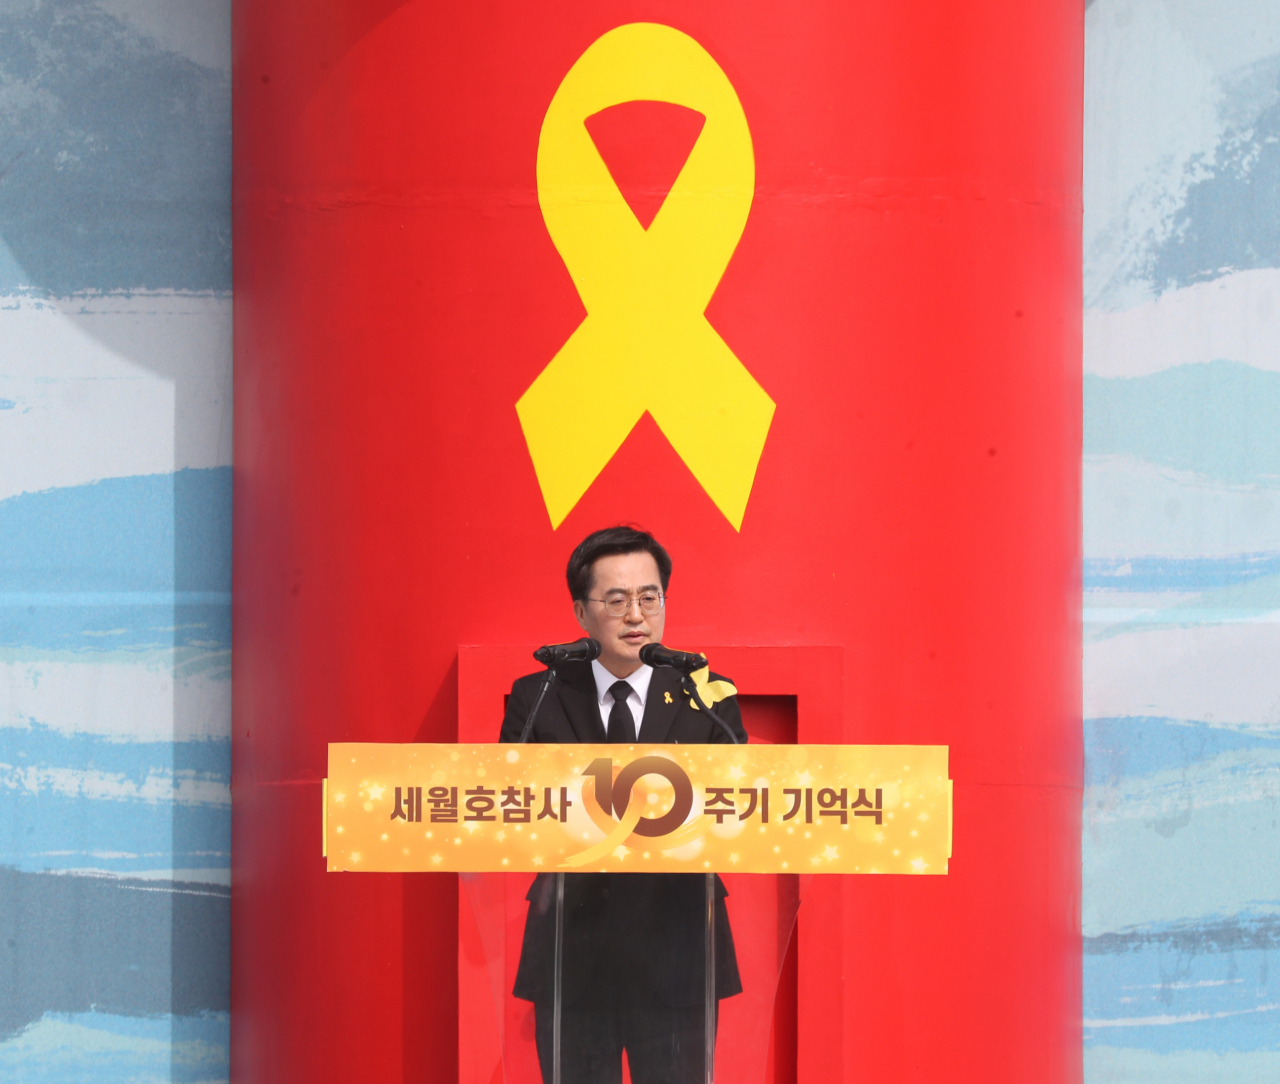 Gyeonggi Province Governor Kim Dong-yeon delivers a memorial speech during a ceremony honoring the 10th anniversary of the Sewol ferry accident that claimed 304 lives, mostly high school students on a school excursion, at the Hwarang Public Garden in Ansan, Gyeonggi Province, on Tuesday. The ferry sank off the country's southwestern coast on its way to the country's southern Jeju Island on April 16, 2014. (Yonhap)